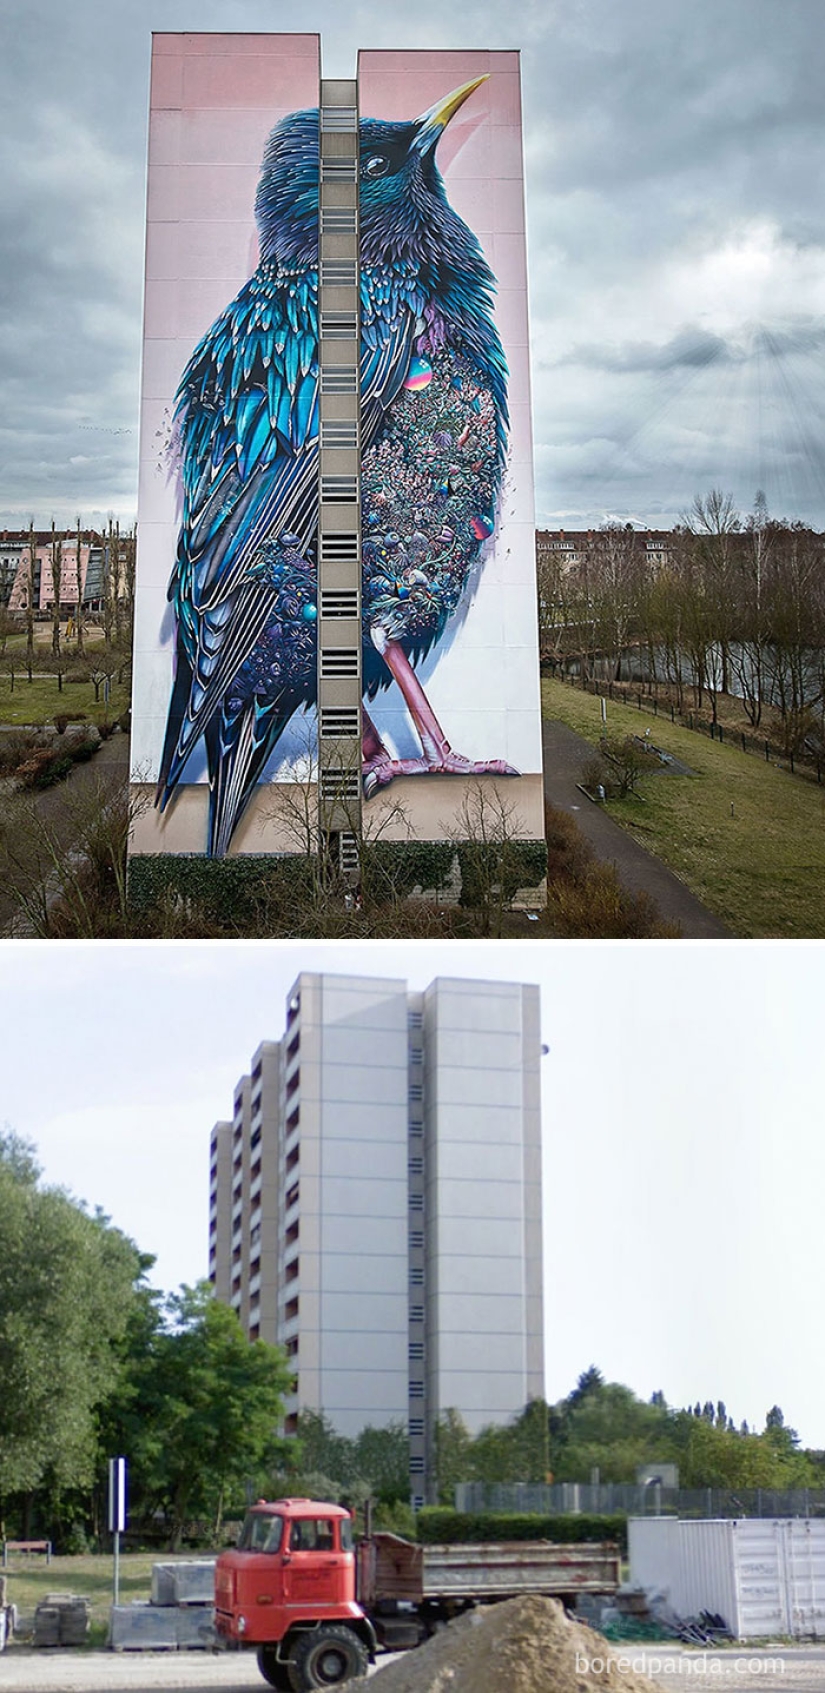 Incredible street art. Before and afterIncredible street art. Before and after